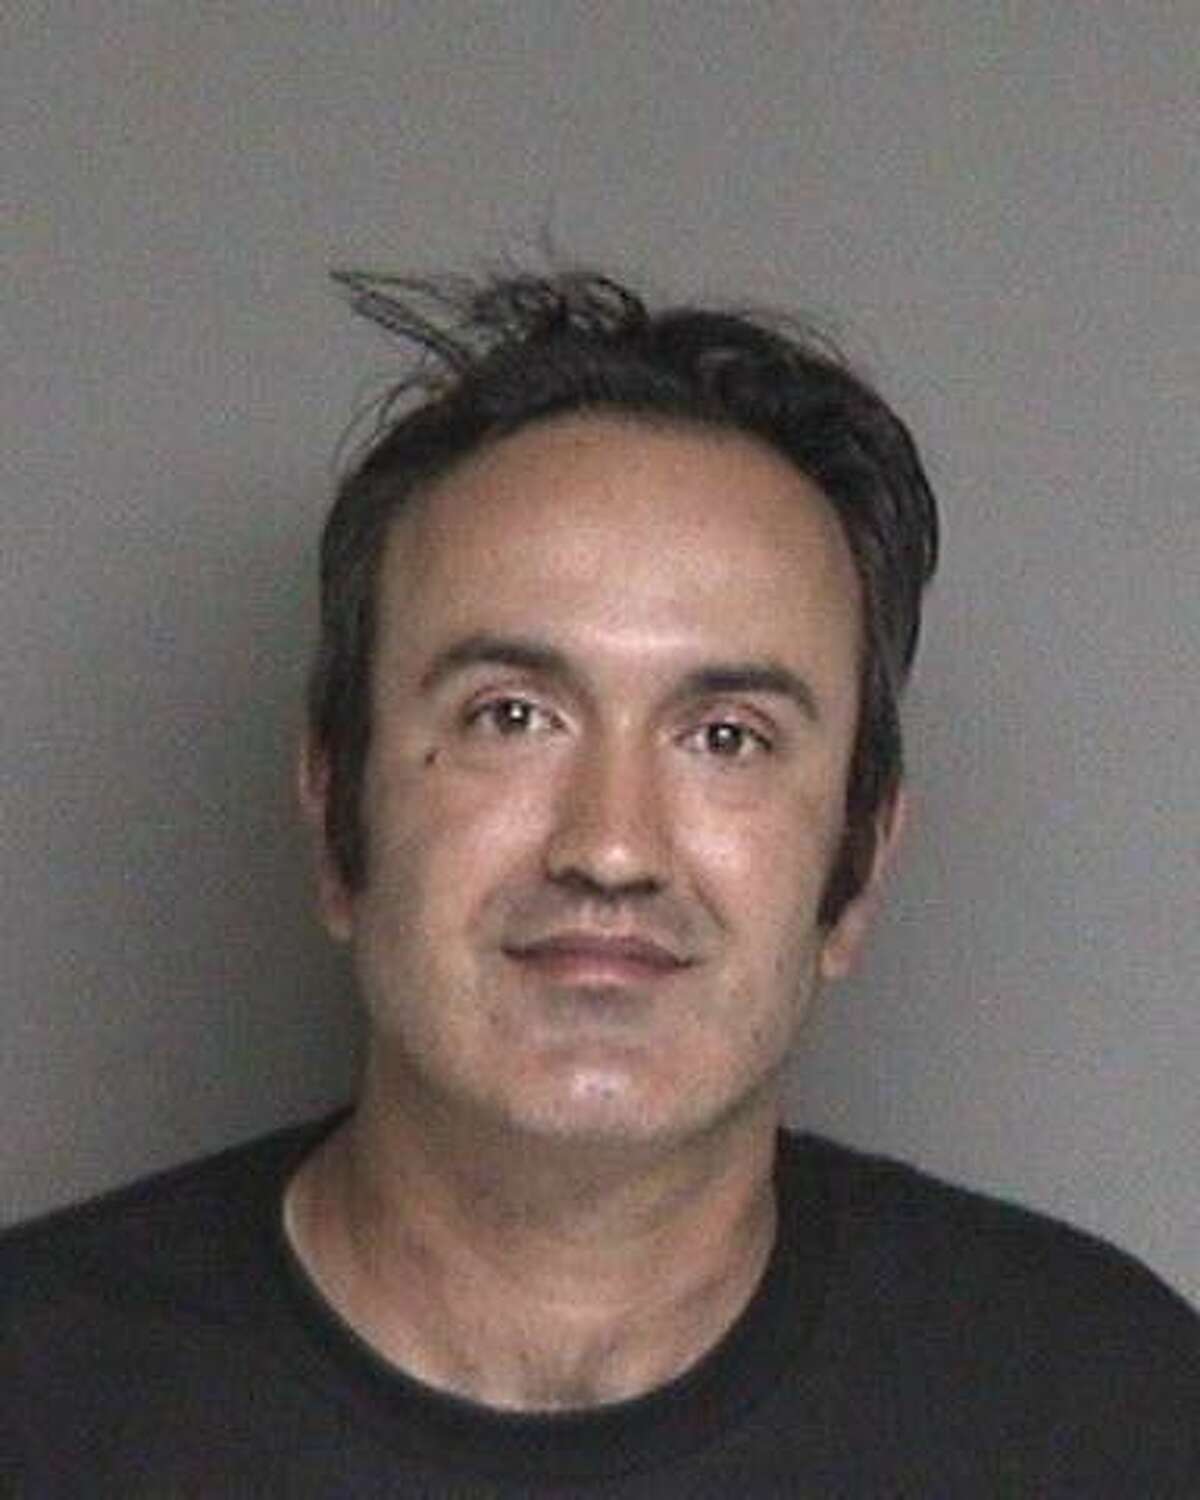 Farzad Fazeli, 35, was arrested on suspicion of attempting to stab a Republican Congressional candidate at the Castro Valley Fall Festival on Sunday, Sept. 9, 2018.